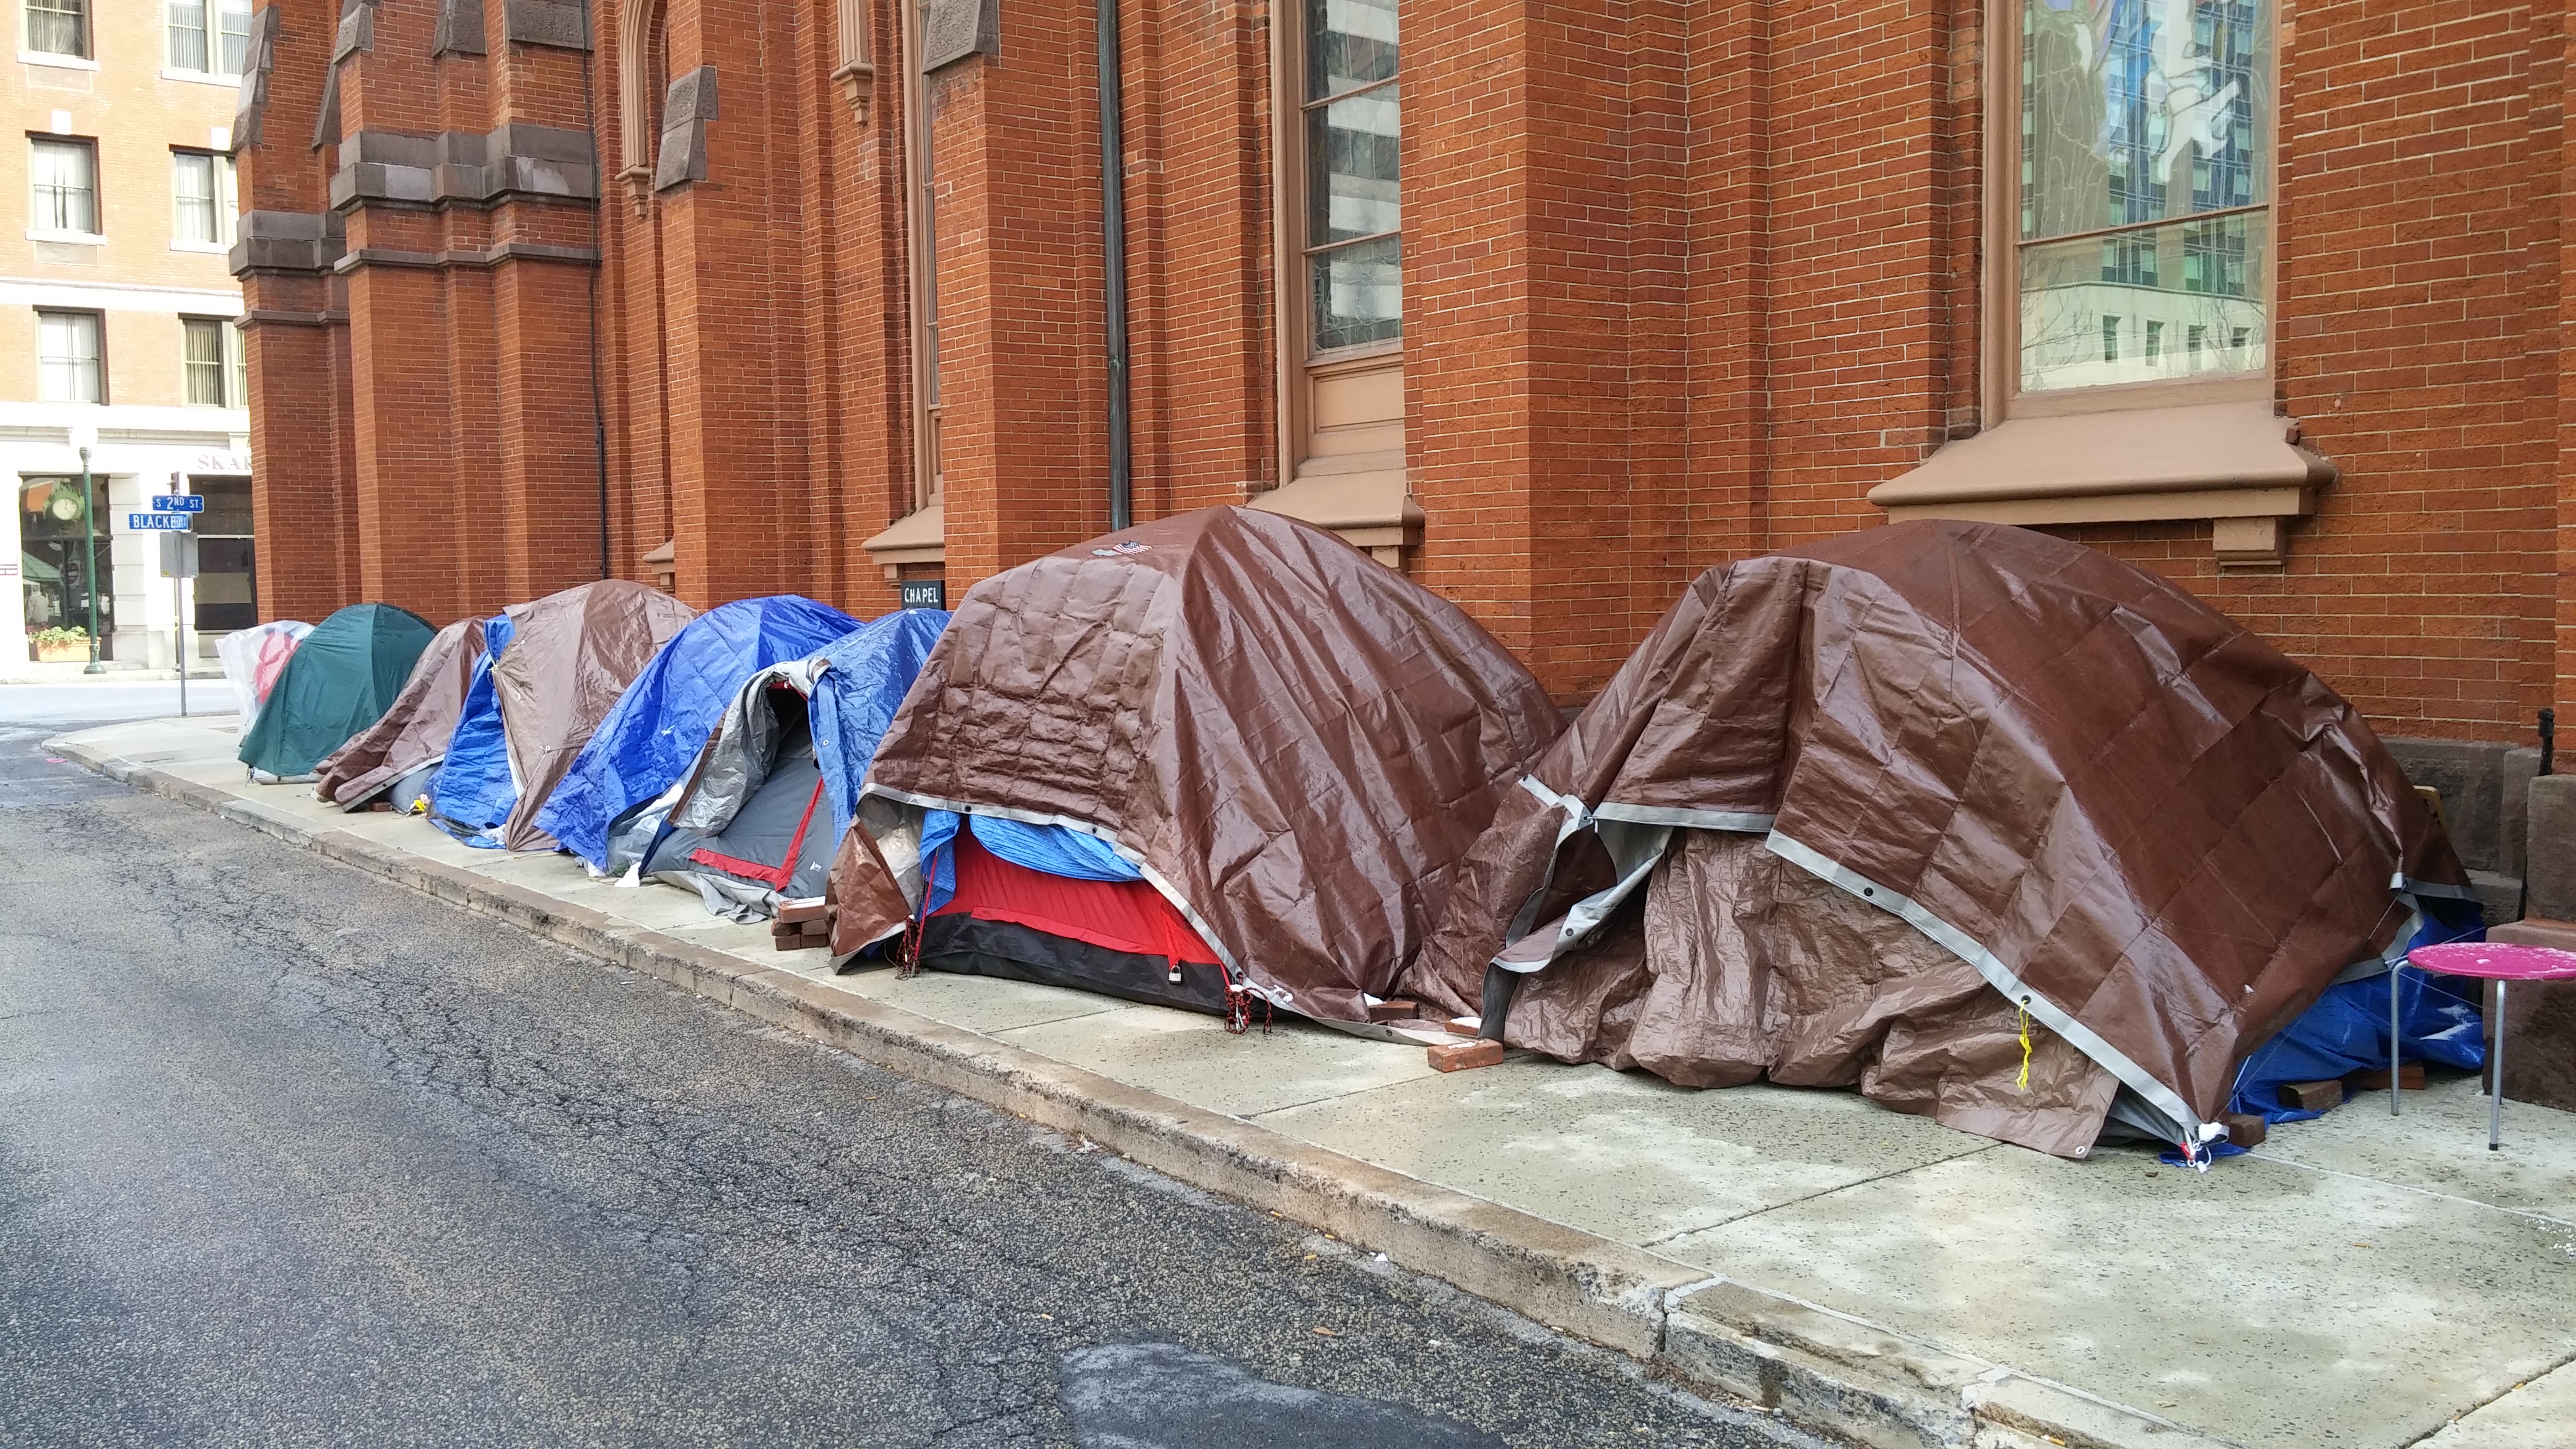 market square church comes to rescue of harrisburg homeless | synod